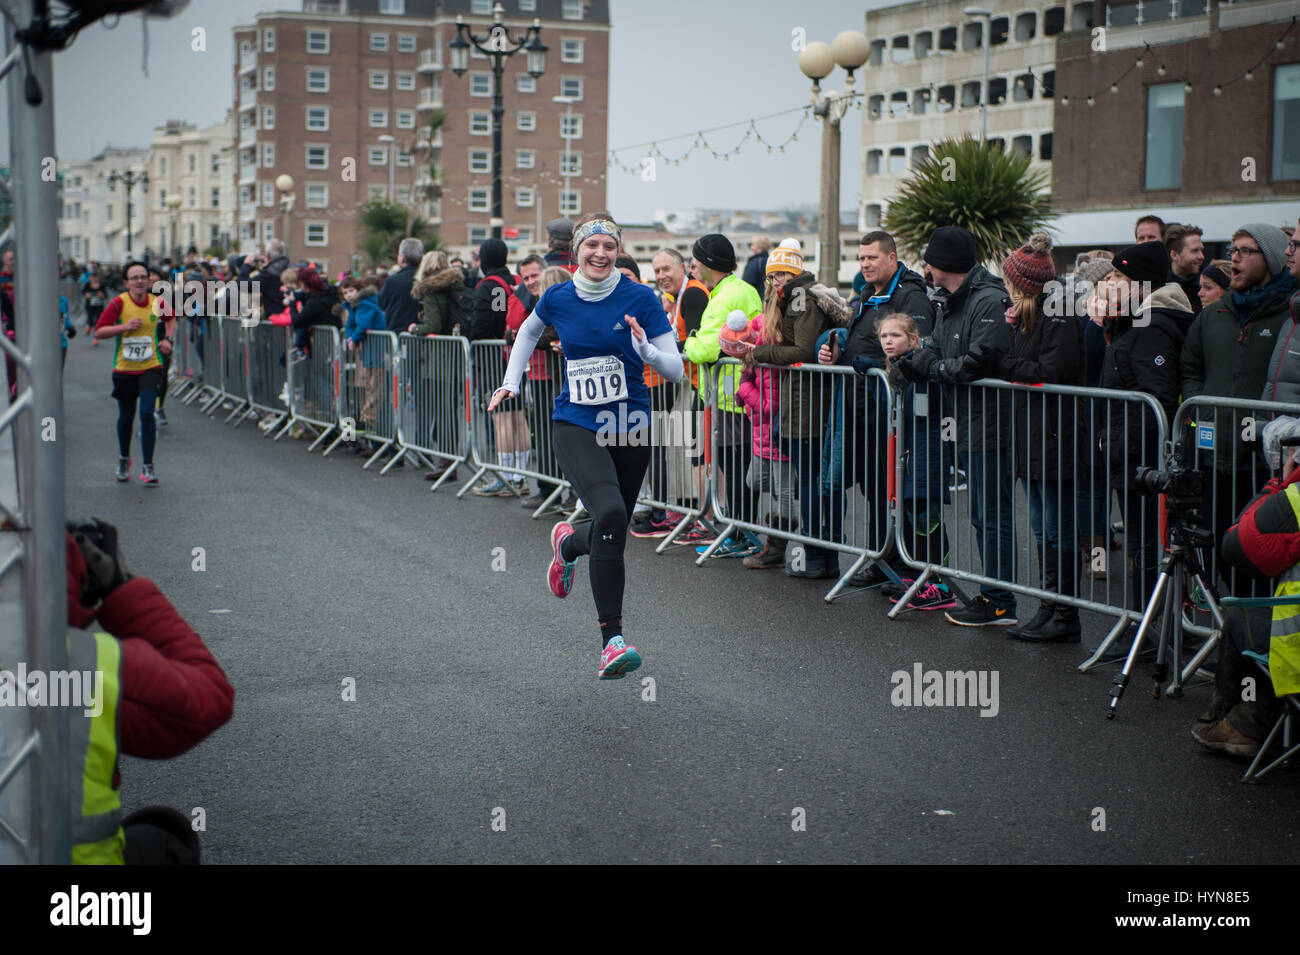 Marathon Finish Line High Resolution Stock Photography and Images - Alamy